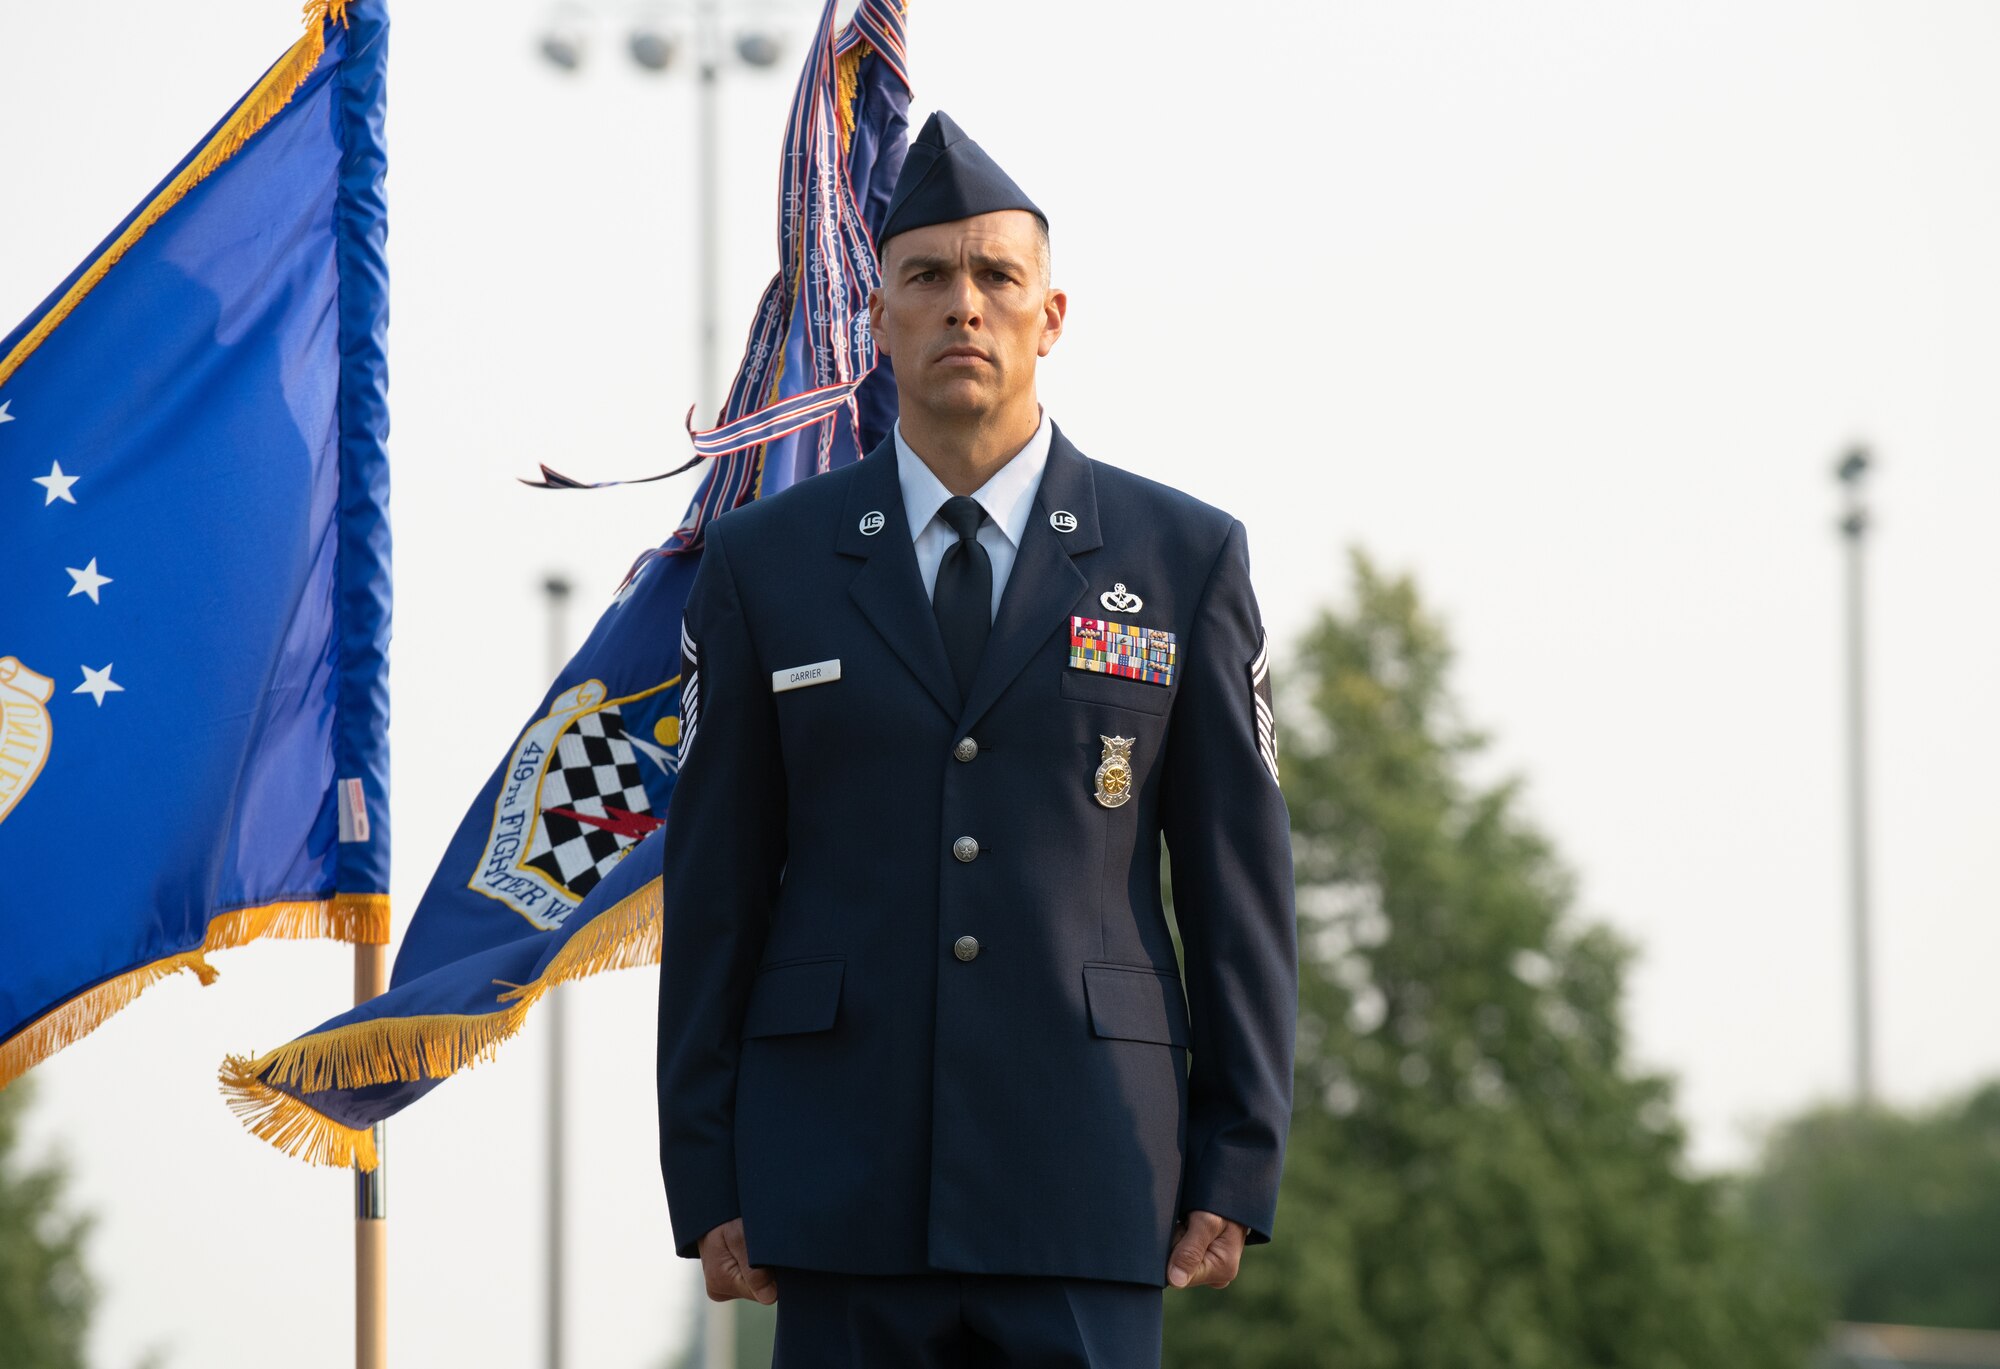 U.S. Air Force Senior Master Sgt. Chad Carrier, 419th Civil Engineer Squadron, stands at attention before being presented the Airman’s Medal at Hill Air Force Base, Utah on July 11, 2021. The Airman’s Medal is a distinguished decoration awarded to those who display heroism or acts of heroism that involve a voluntary risk of life under non-combat conditions.